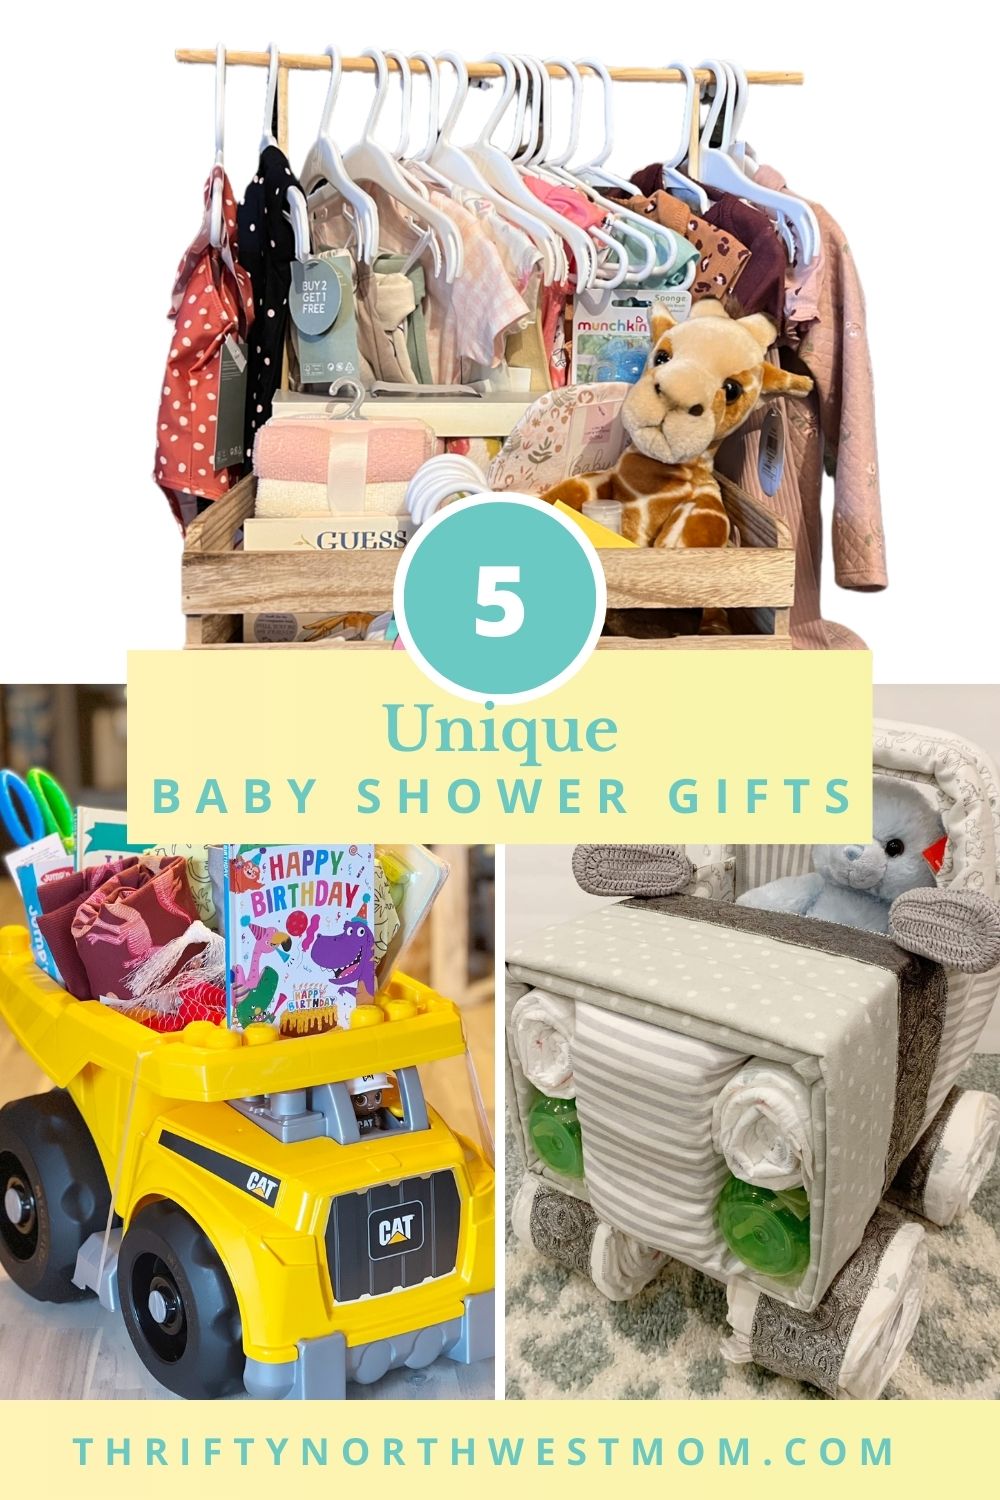 5 Unique Baby Shower Gifts - Fun To Make Gift! - NW Mom